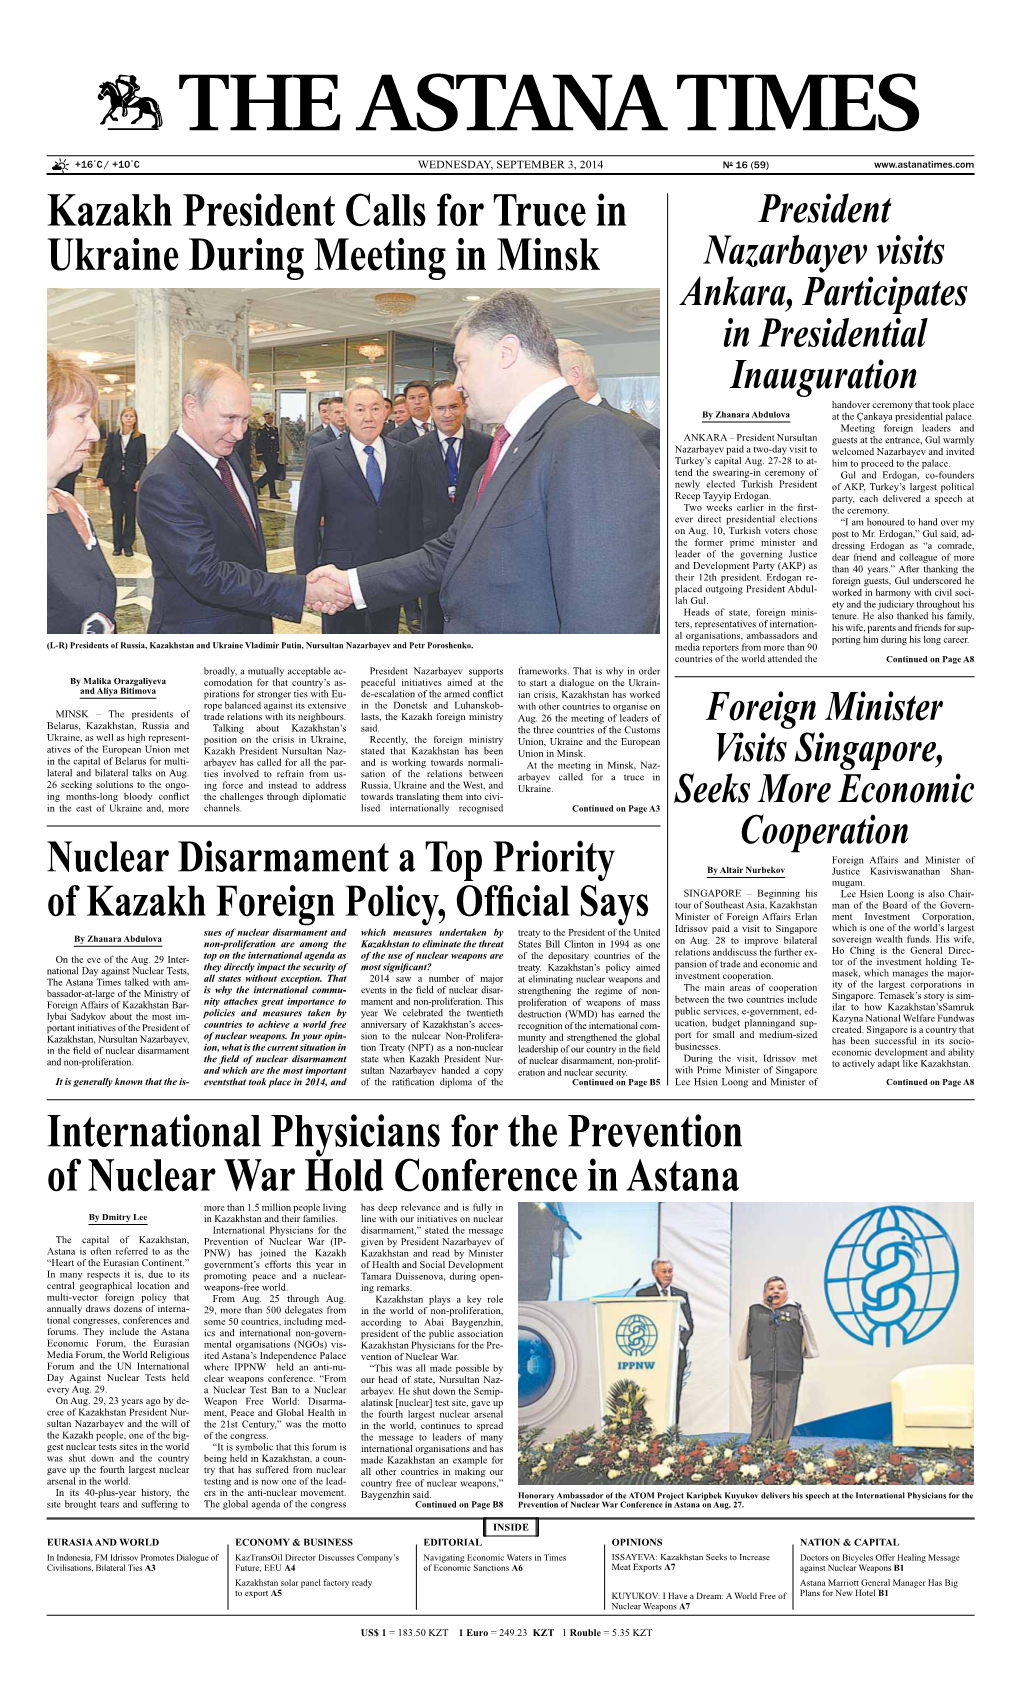 International Physicians for the Prevention of Nuclear War Hold